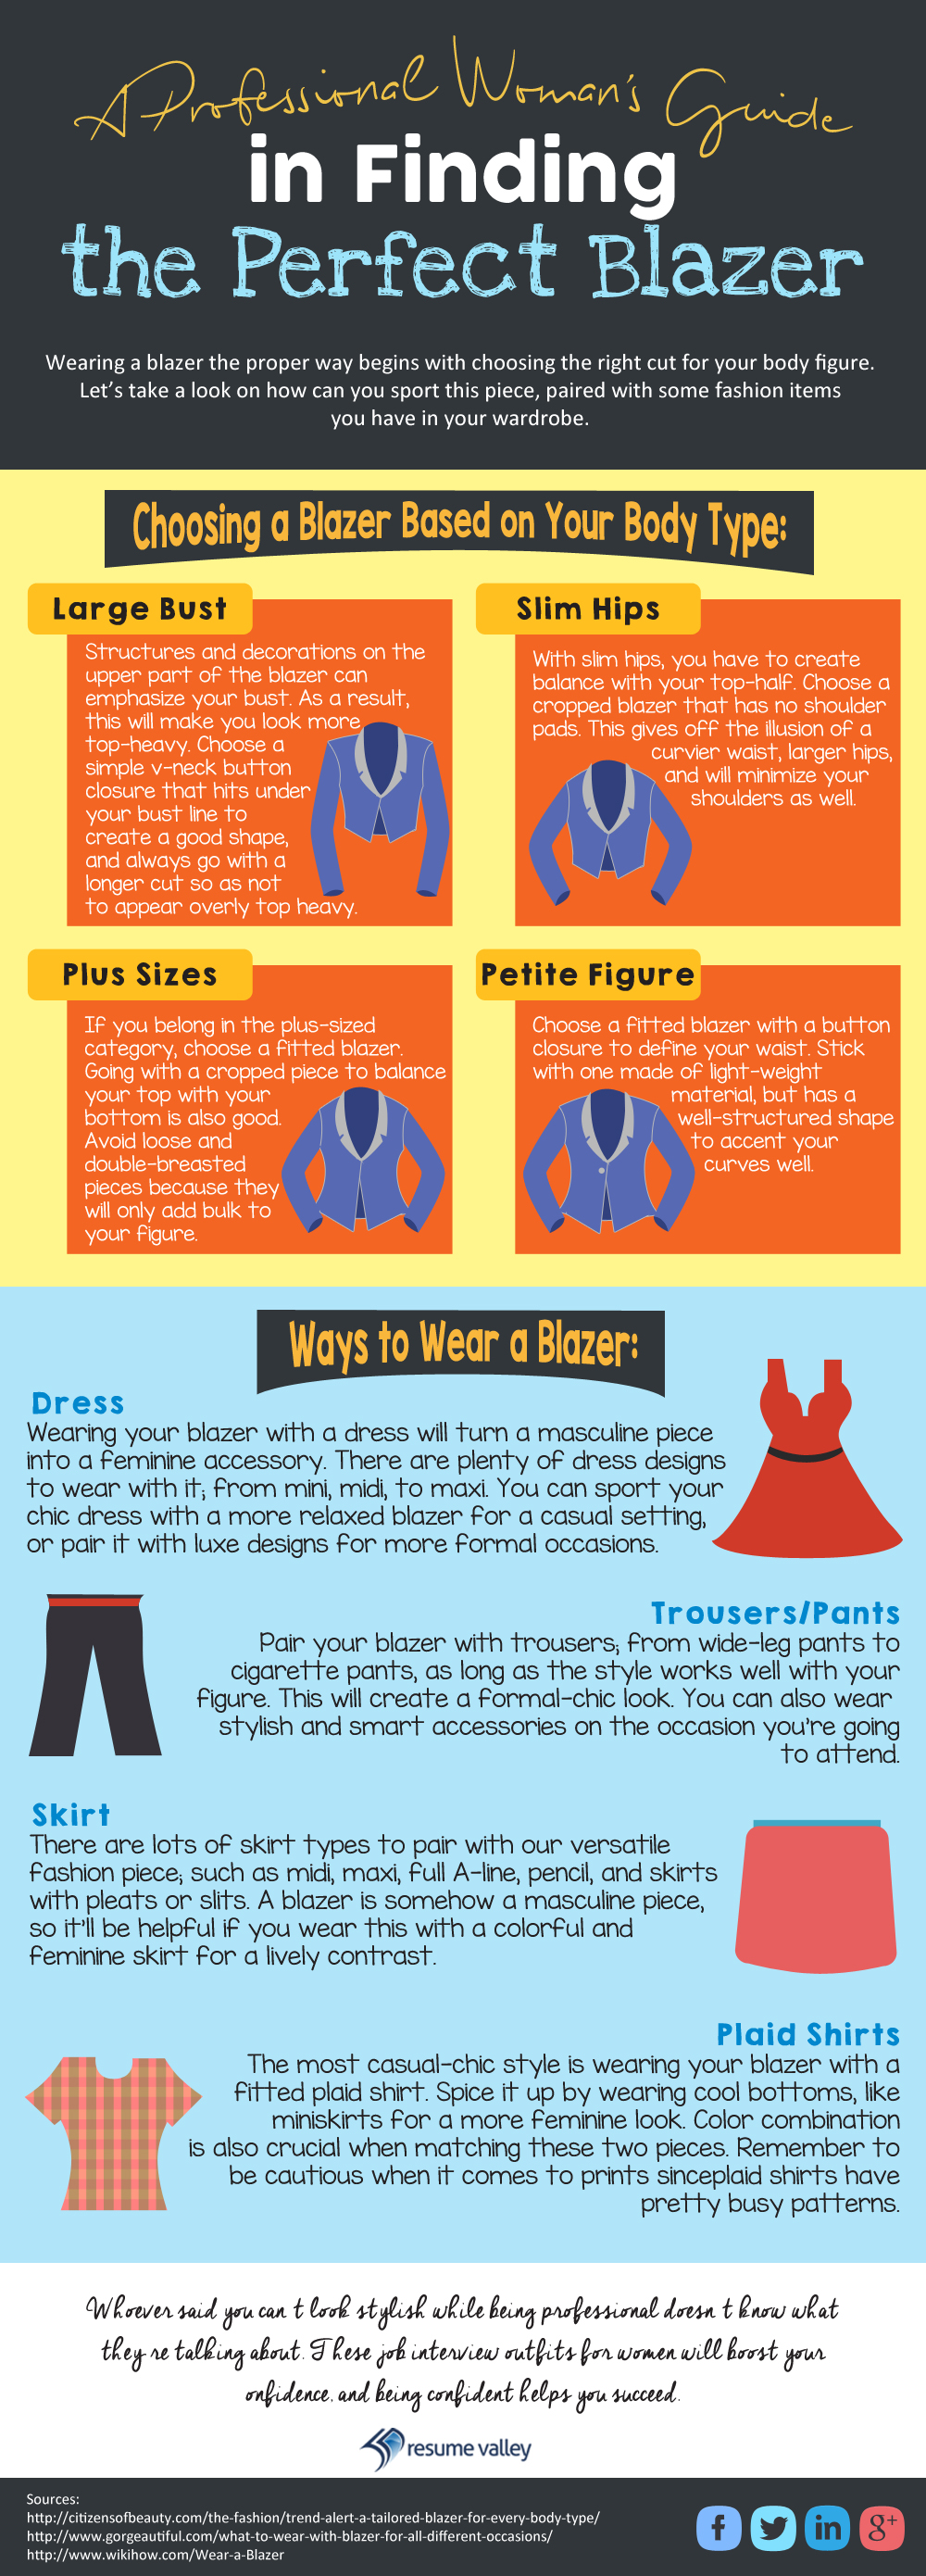 A Professional Woman_s Guide in Finding the Perfect Blazer